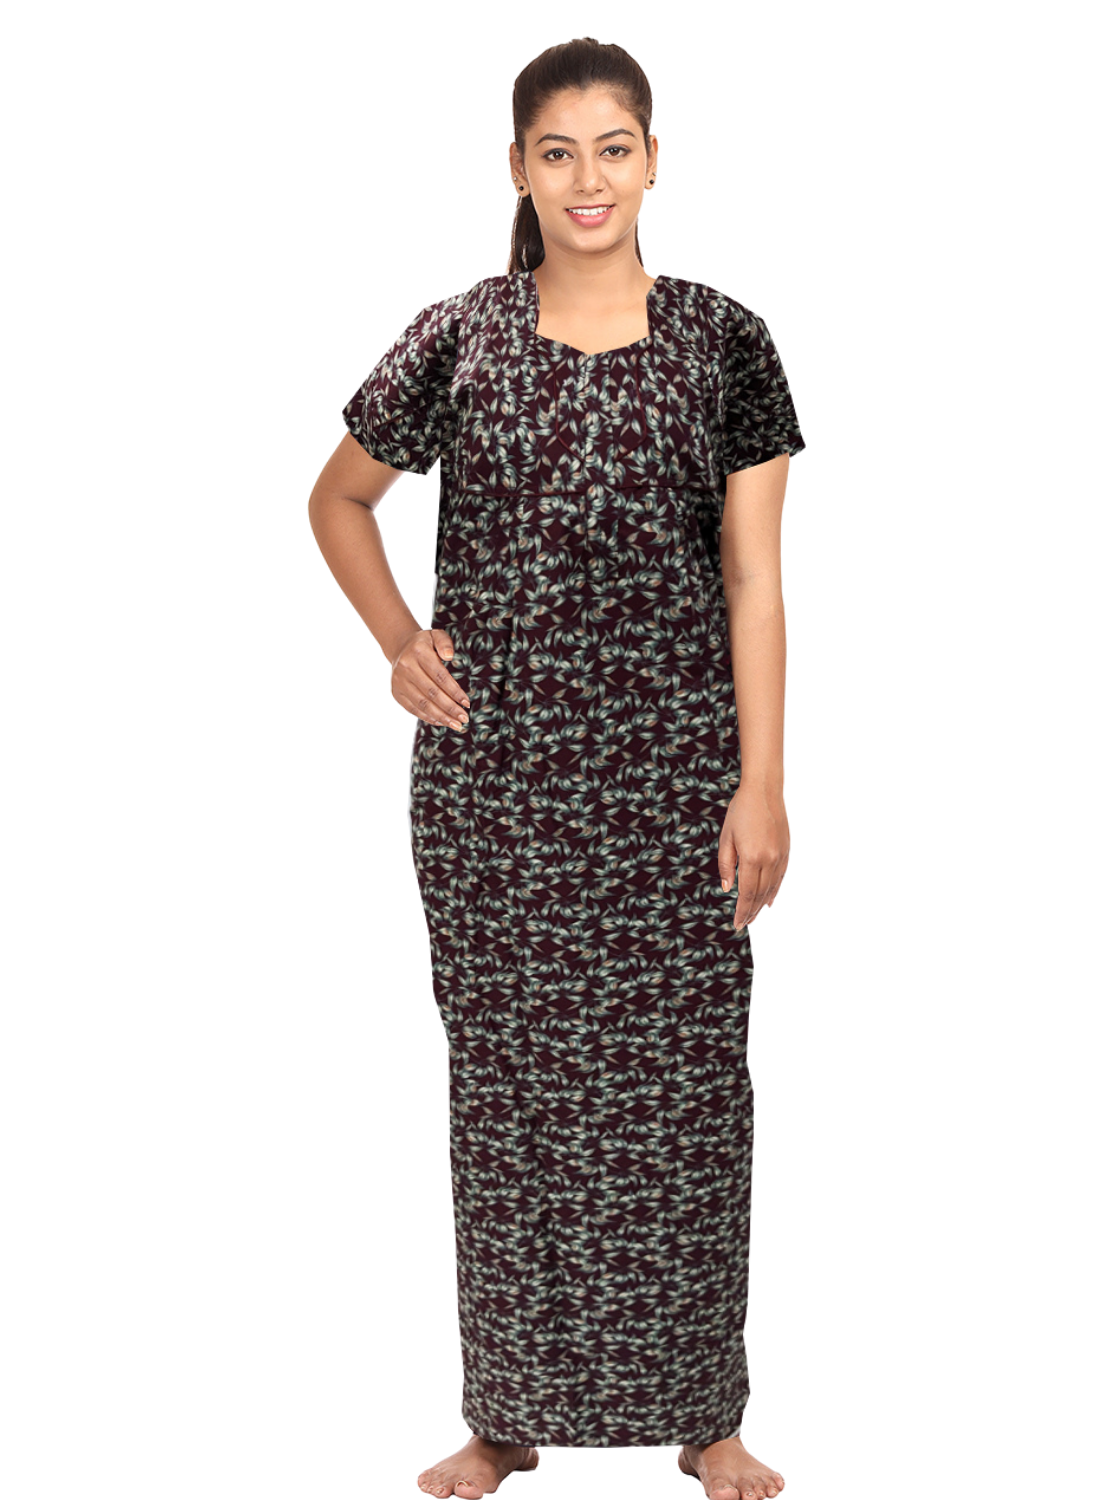 MANGAI Printed Cotton PLEATED Model 3XL Size Nighties - Fancy Neck | With Side Pocket |Shrinkage Free Nighties | Trendy Collection's for Trendy Women's